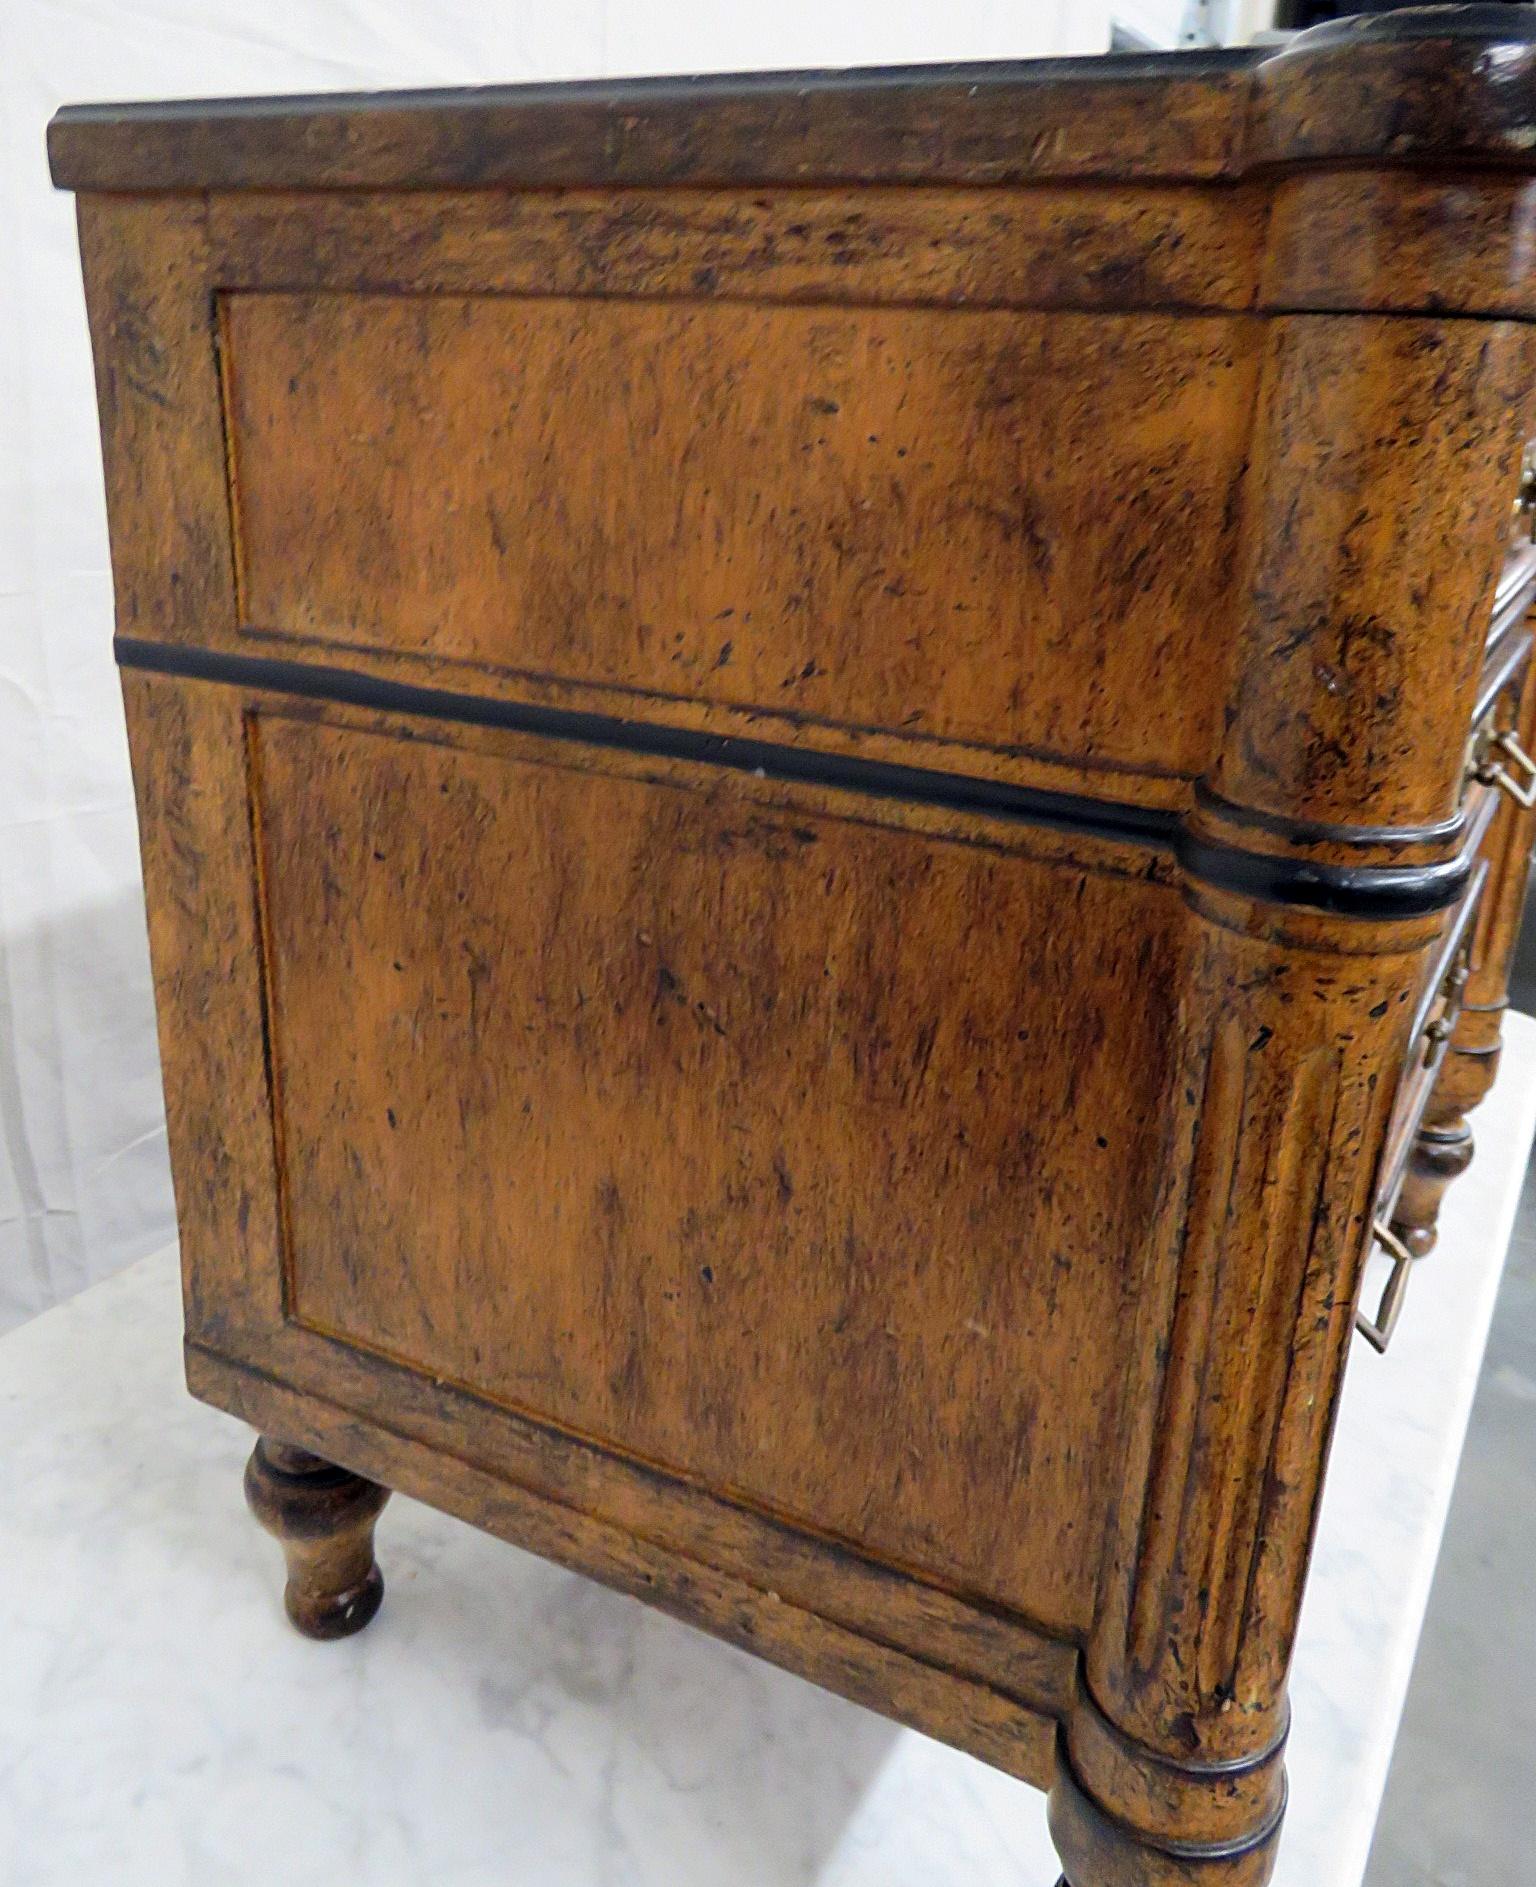 20th Century French Paint Decorated Directoire Petite Commode Jewelry Chest by Lewis Mittman For Sale